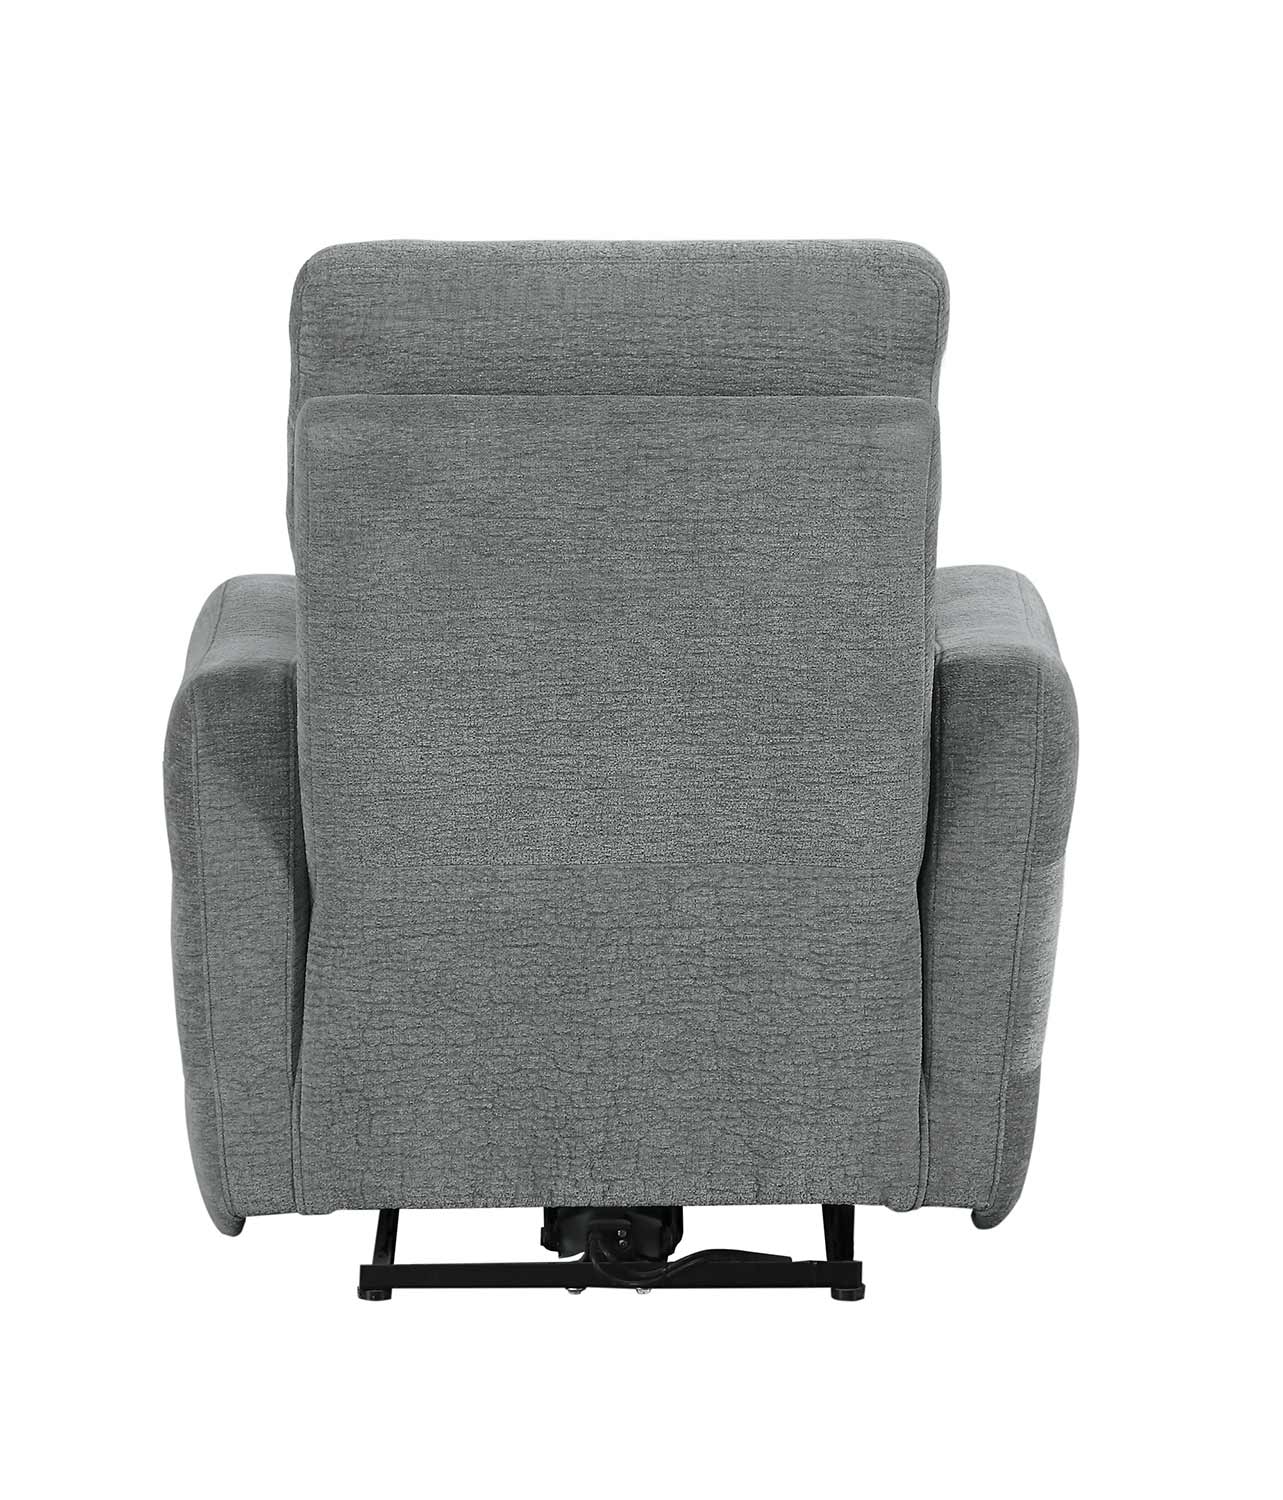 Homelegance Edition Power Lay Flat Reclining Chair with Power Headrest - Dove